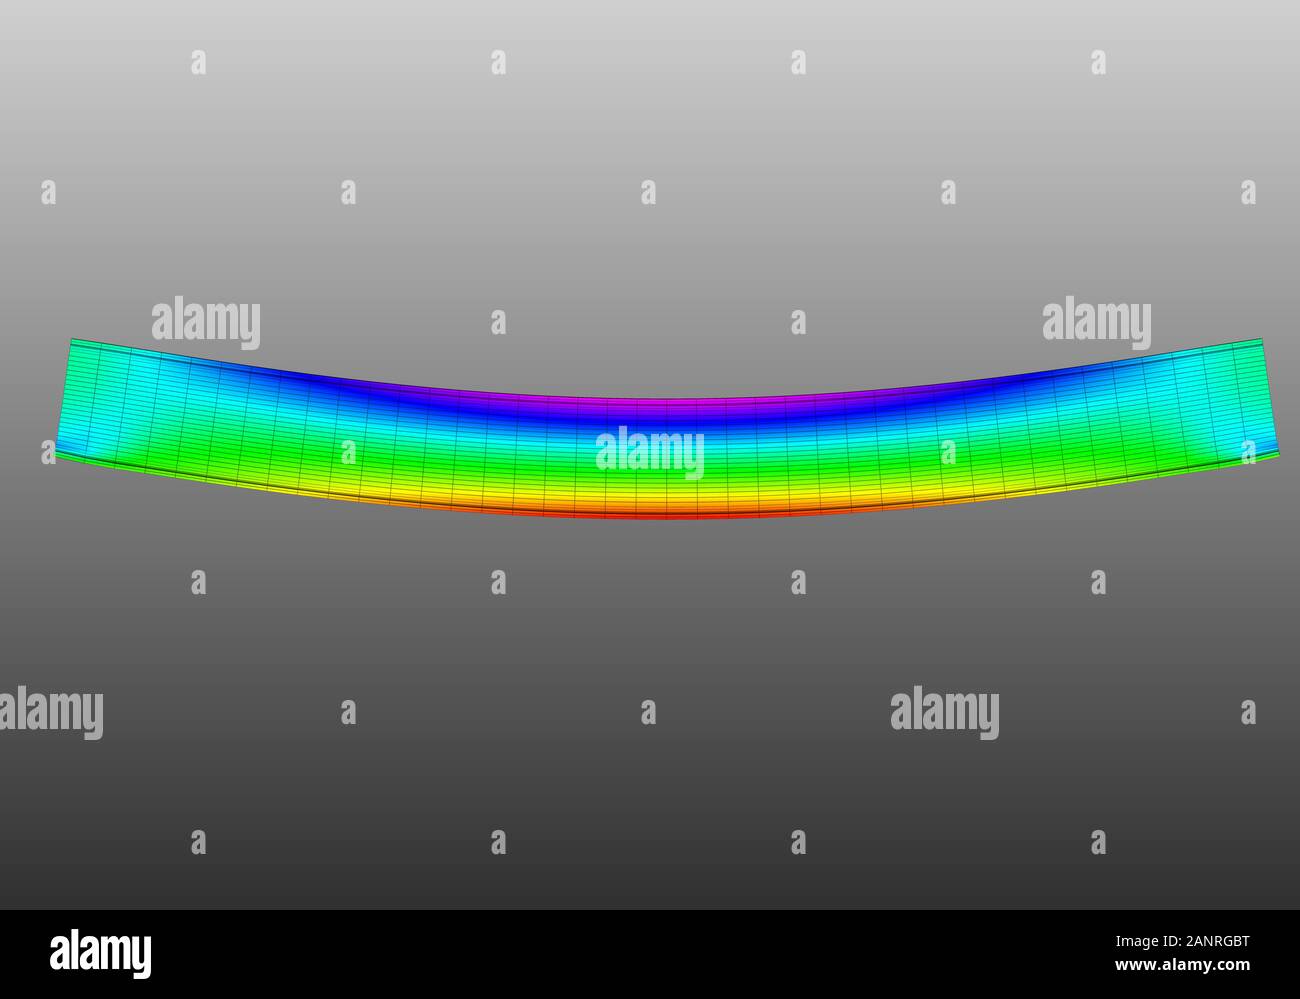 A Simple Supported I Beam Bending Side 3d View Of Mesh Deformation And Plot Of Normal Stresses From Finite Element Analysis On Grey Backround Stock Photo Alamy